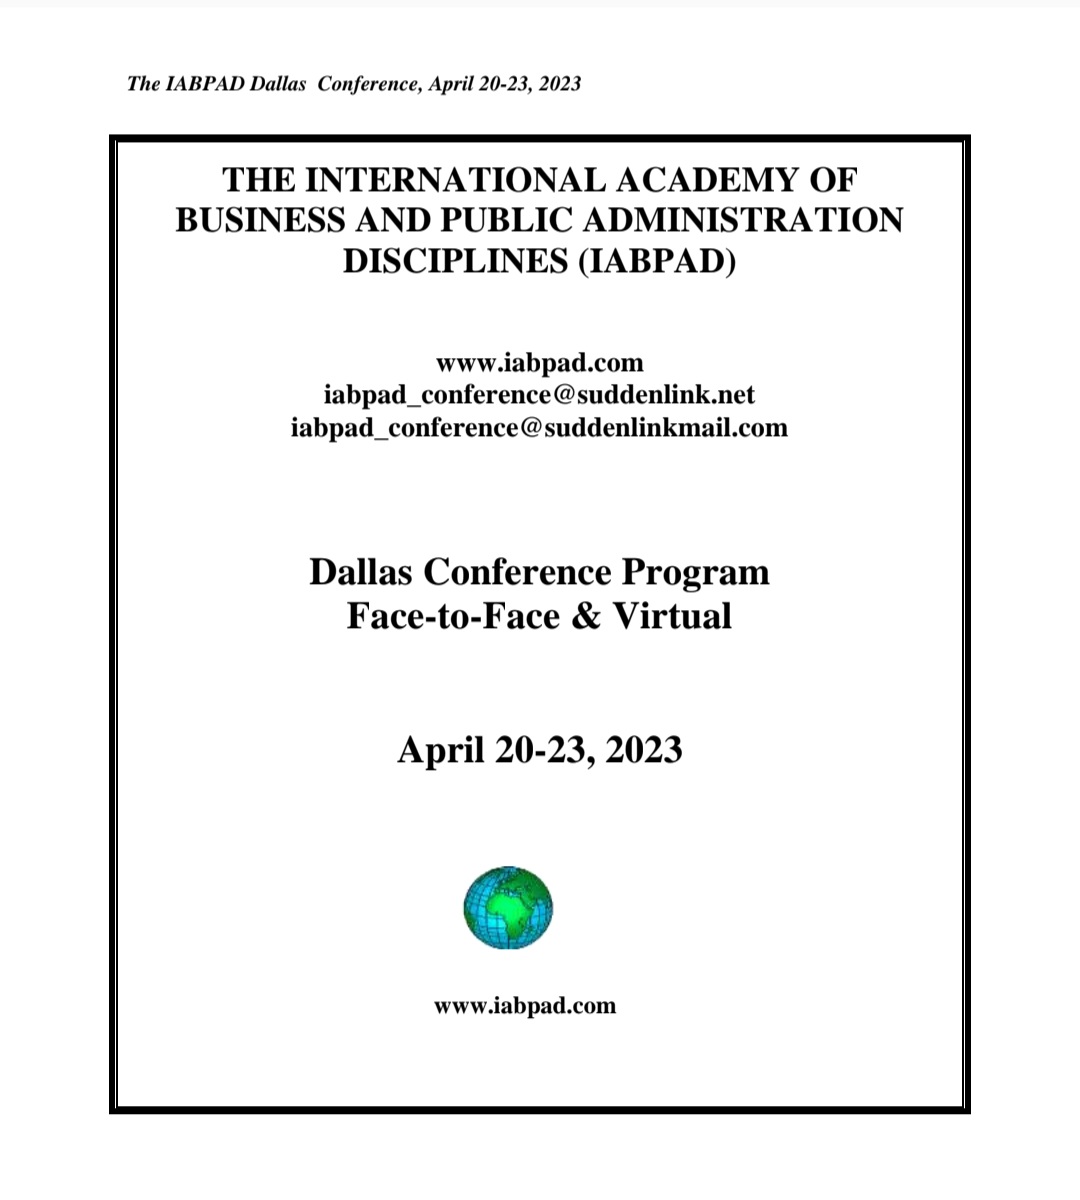 I am presenting at the IABPAD Conference:

* Comparing National Trends in Business Doctorates Awarded to Black and White Students from 2001 to 2020

* Experiential Learning in the Hospitality Classroom 

#business #hospitality #IUN #conferencepresenter